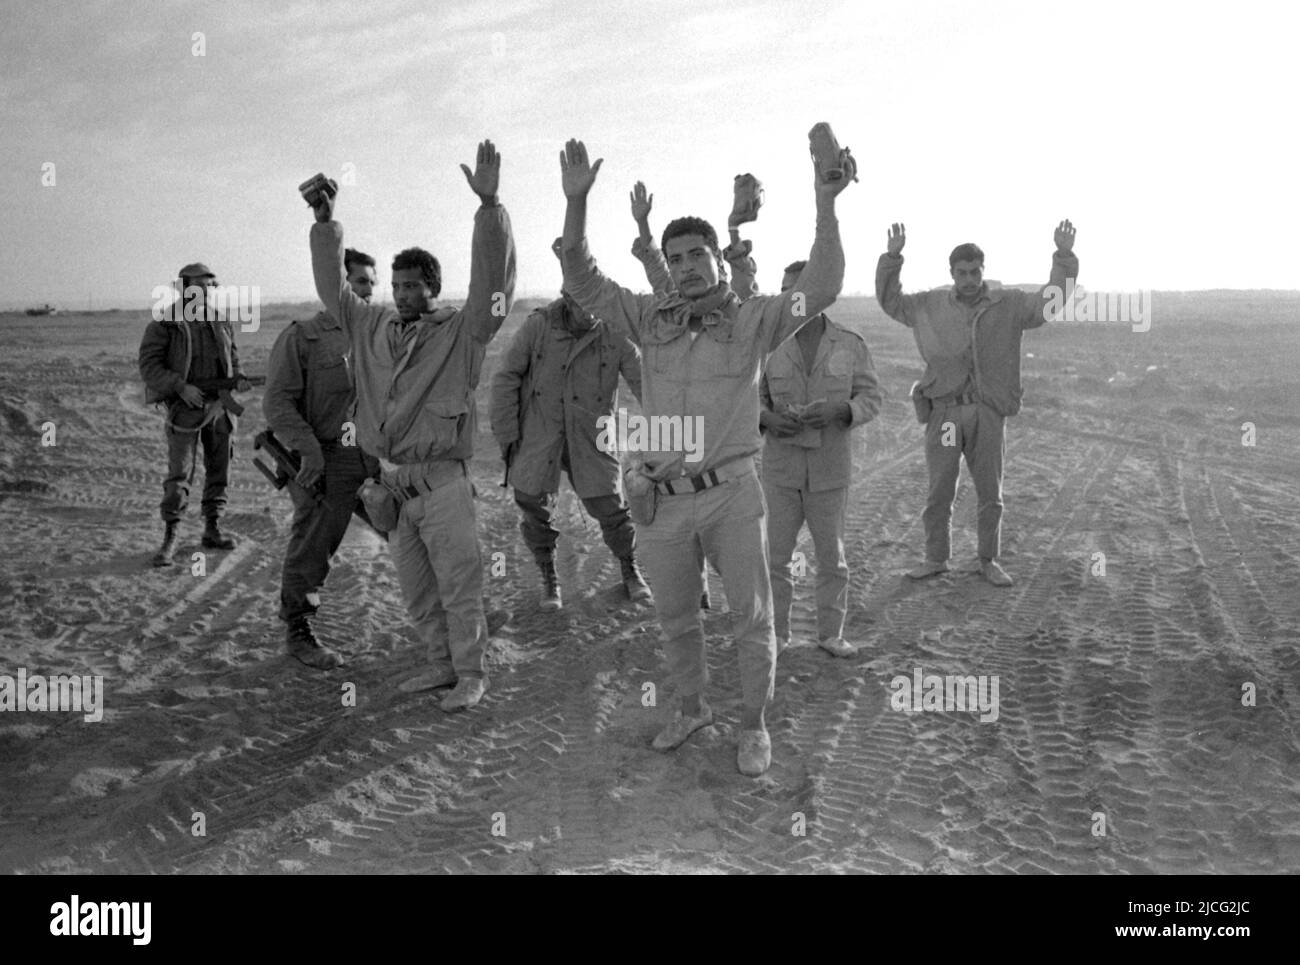 Israel. 06th July, 2020. Egyptian soldiers stand in sand with hands raised, surrendered during Yom Kippur War, The Yom Kippur War between Israel and the Arab states of Egypt, Jordan and Syria lasted from October 6 to October 25, 1973, Â Credit: dpa/Alamy Live News Stock Photo